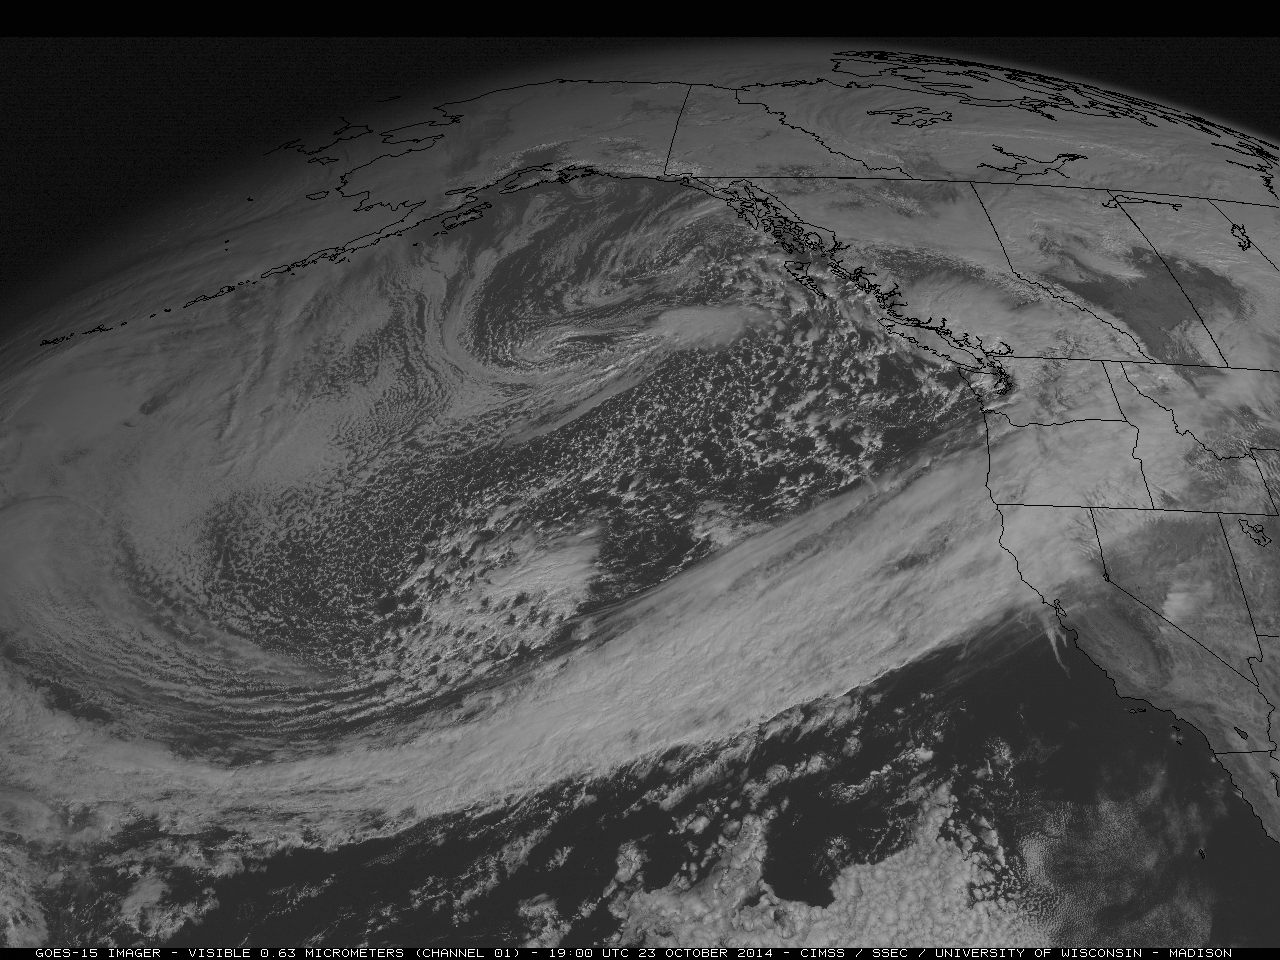 GOES-15 0.63 µm visible channel images